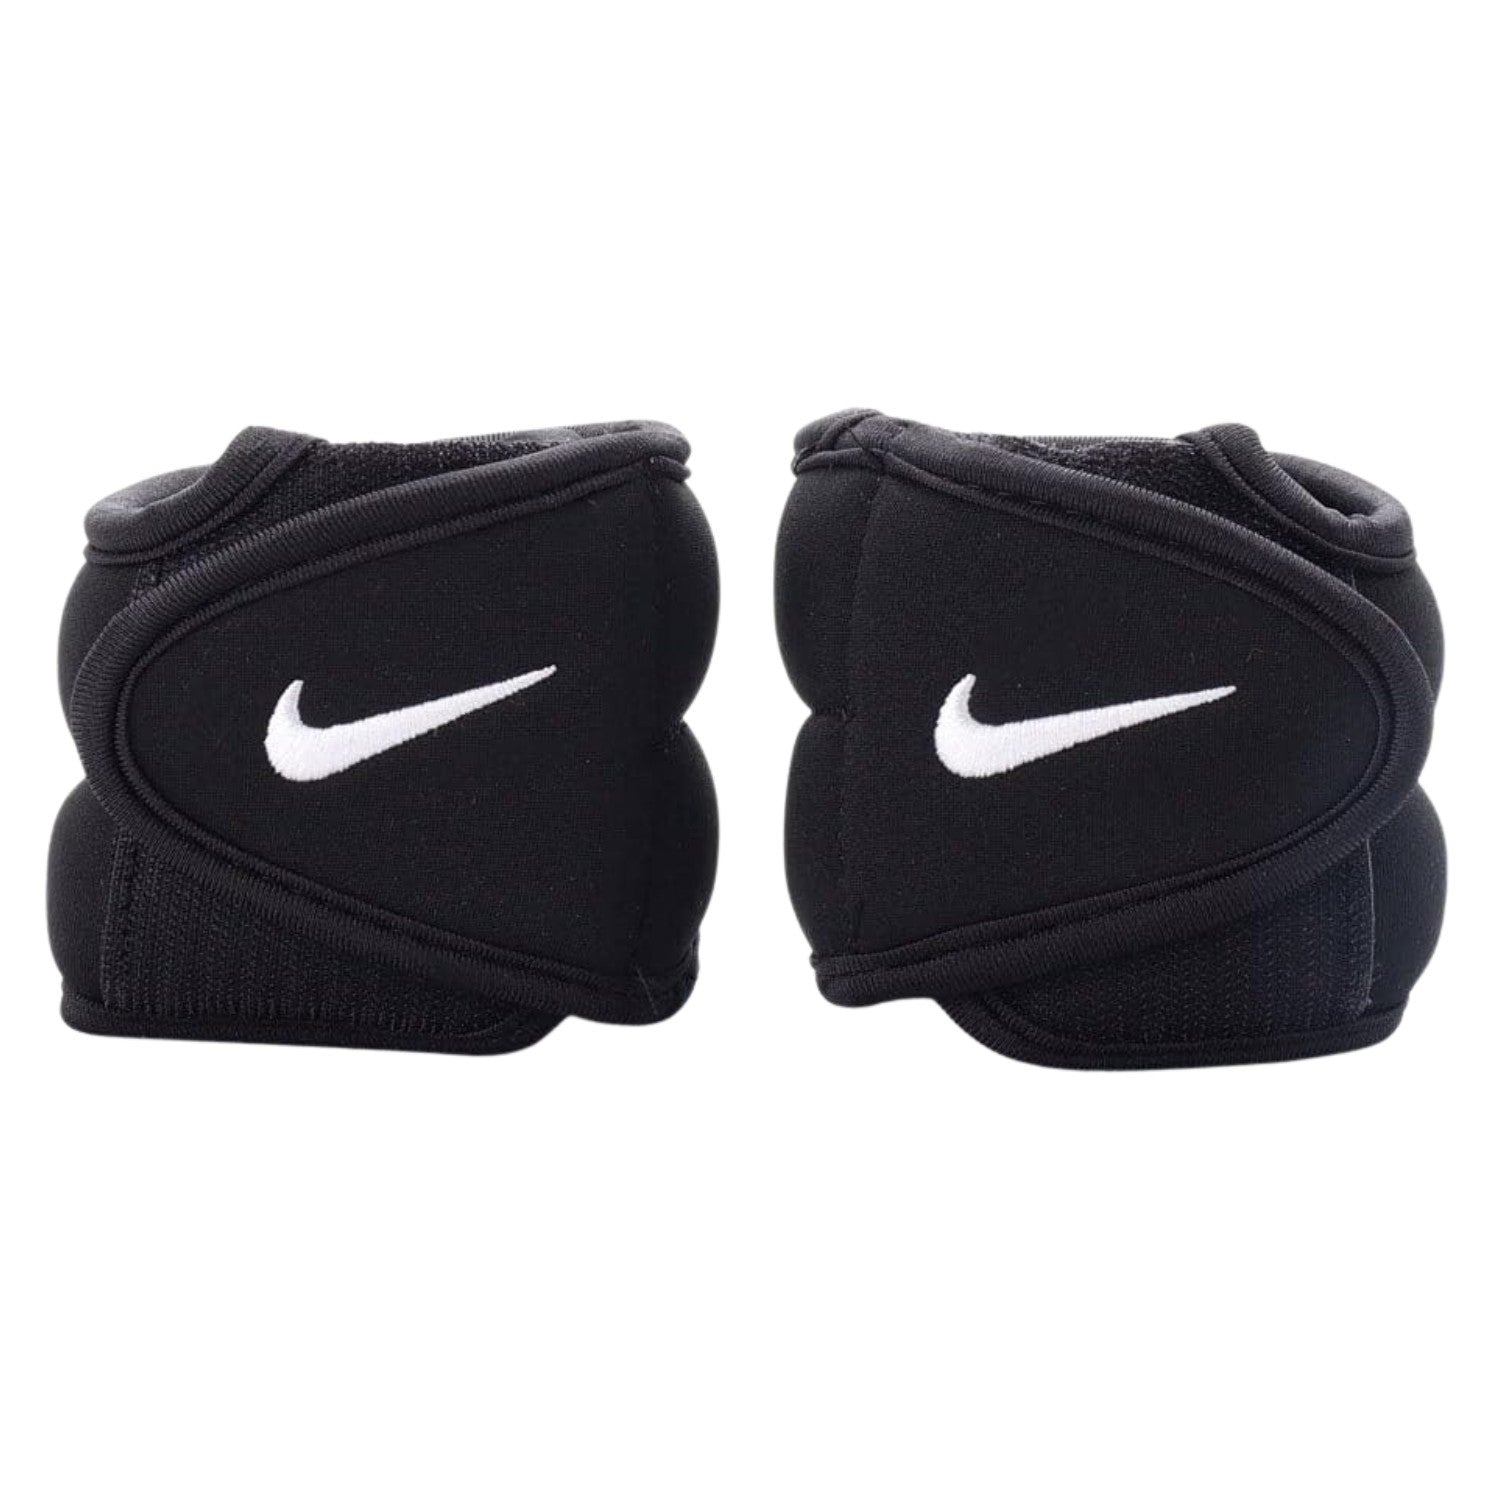 Nike Wrist Weight 1 Lb 2 Pack Unisex Style : N1000817